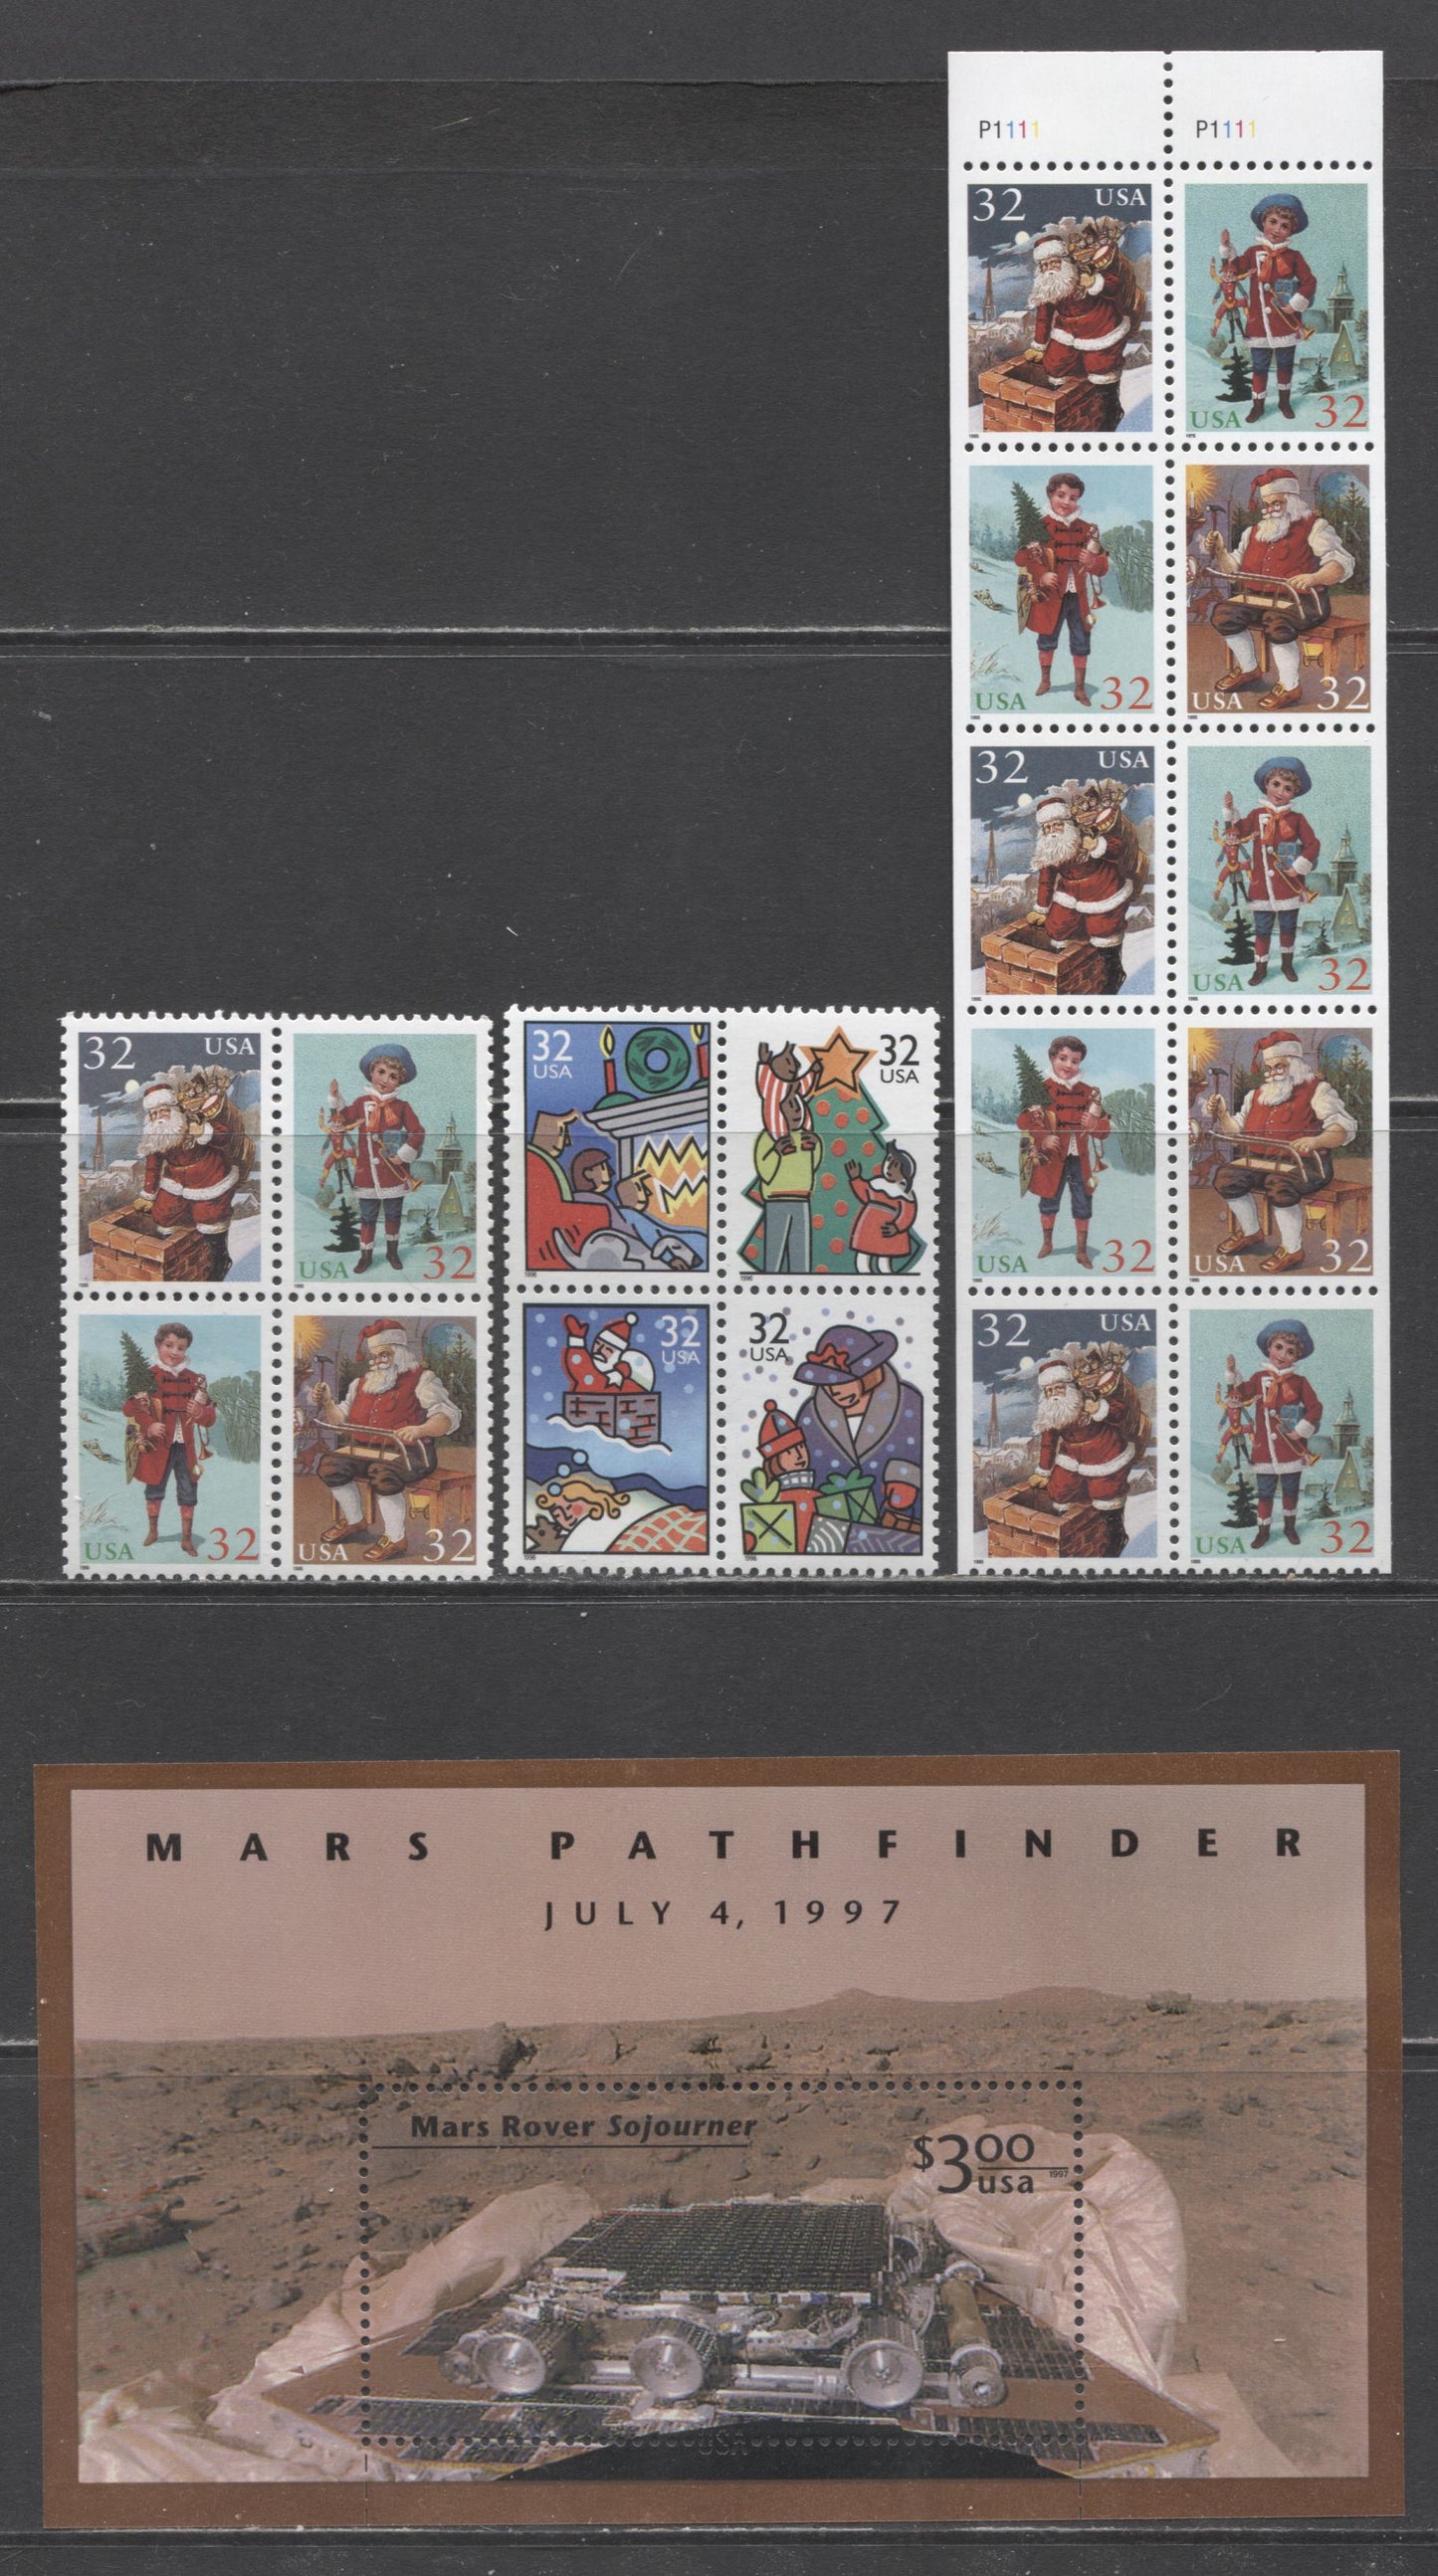 Lot 109 United States SC#3007a/3111a 1995-1997 Christmas & Mars Rover Sojourner Issues, 3 VFNH Souvenir Sheet, Blocks Of 4 & 10, Click on Listing to See ALL Pictures, 2017 Scott Cat. $17.7